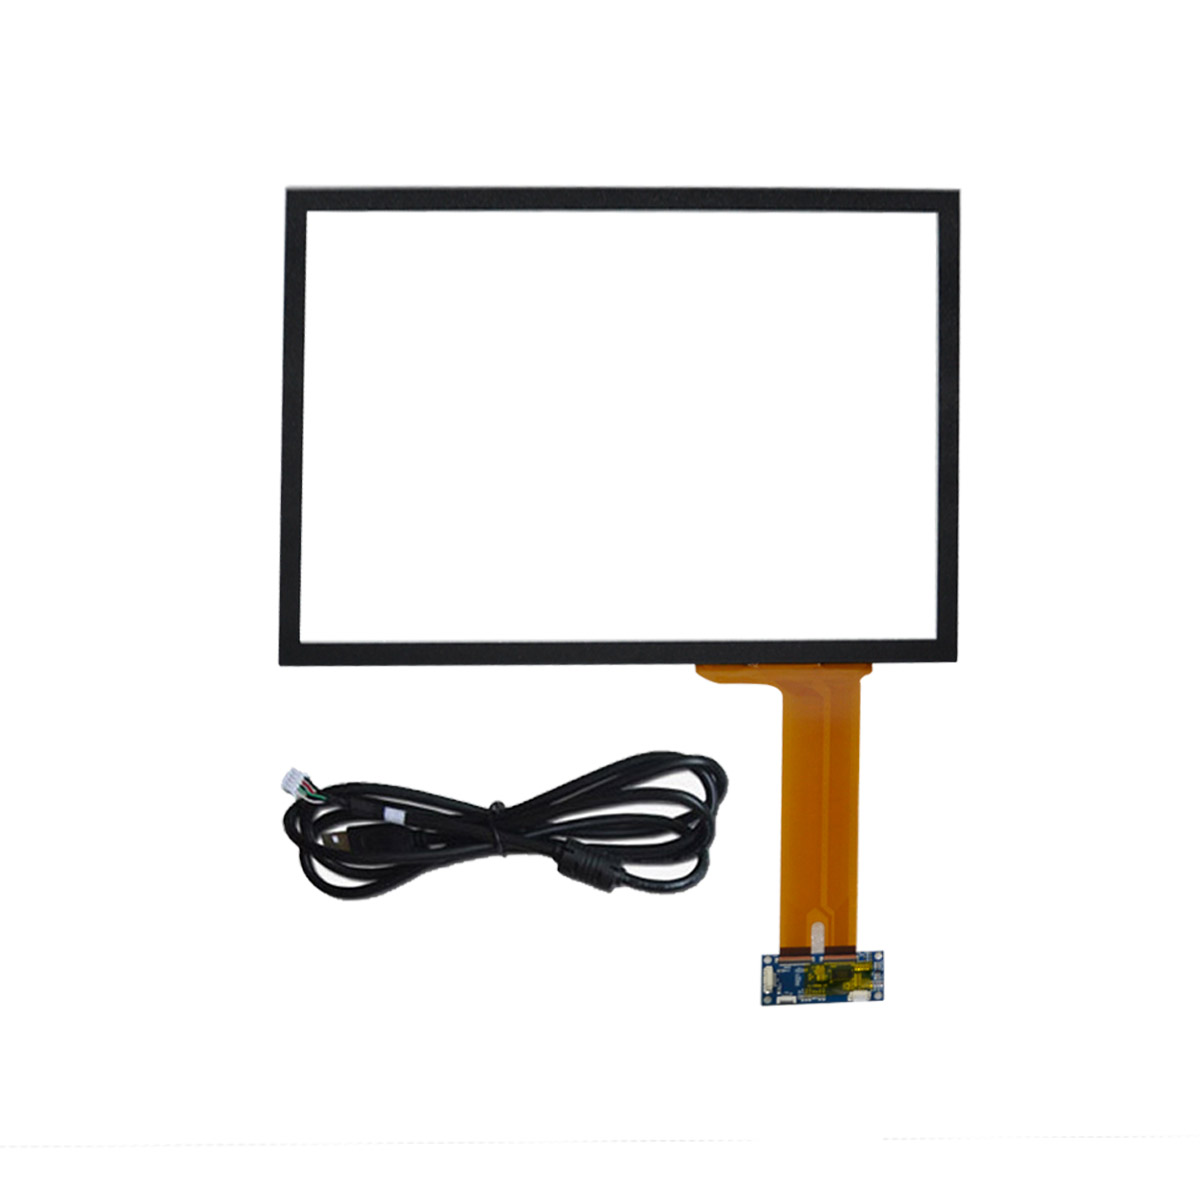 https://www.cjtouch.com/odm-oem-65-inch-high-sensitivity-capacitive-touchscreen-touch-sensor-foil-for-touch-film-digital-product/